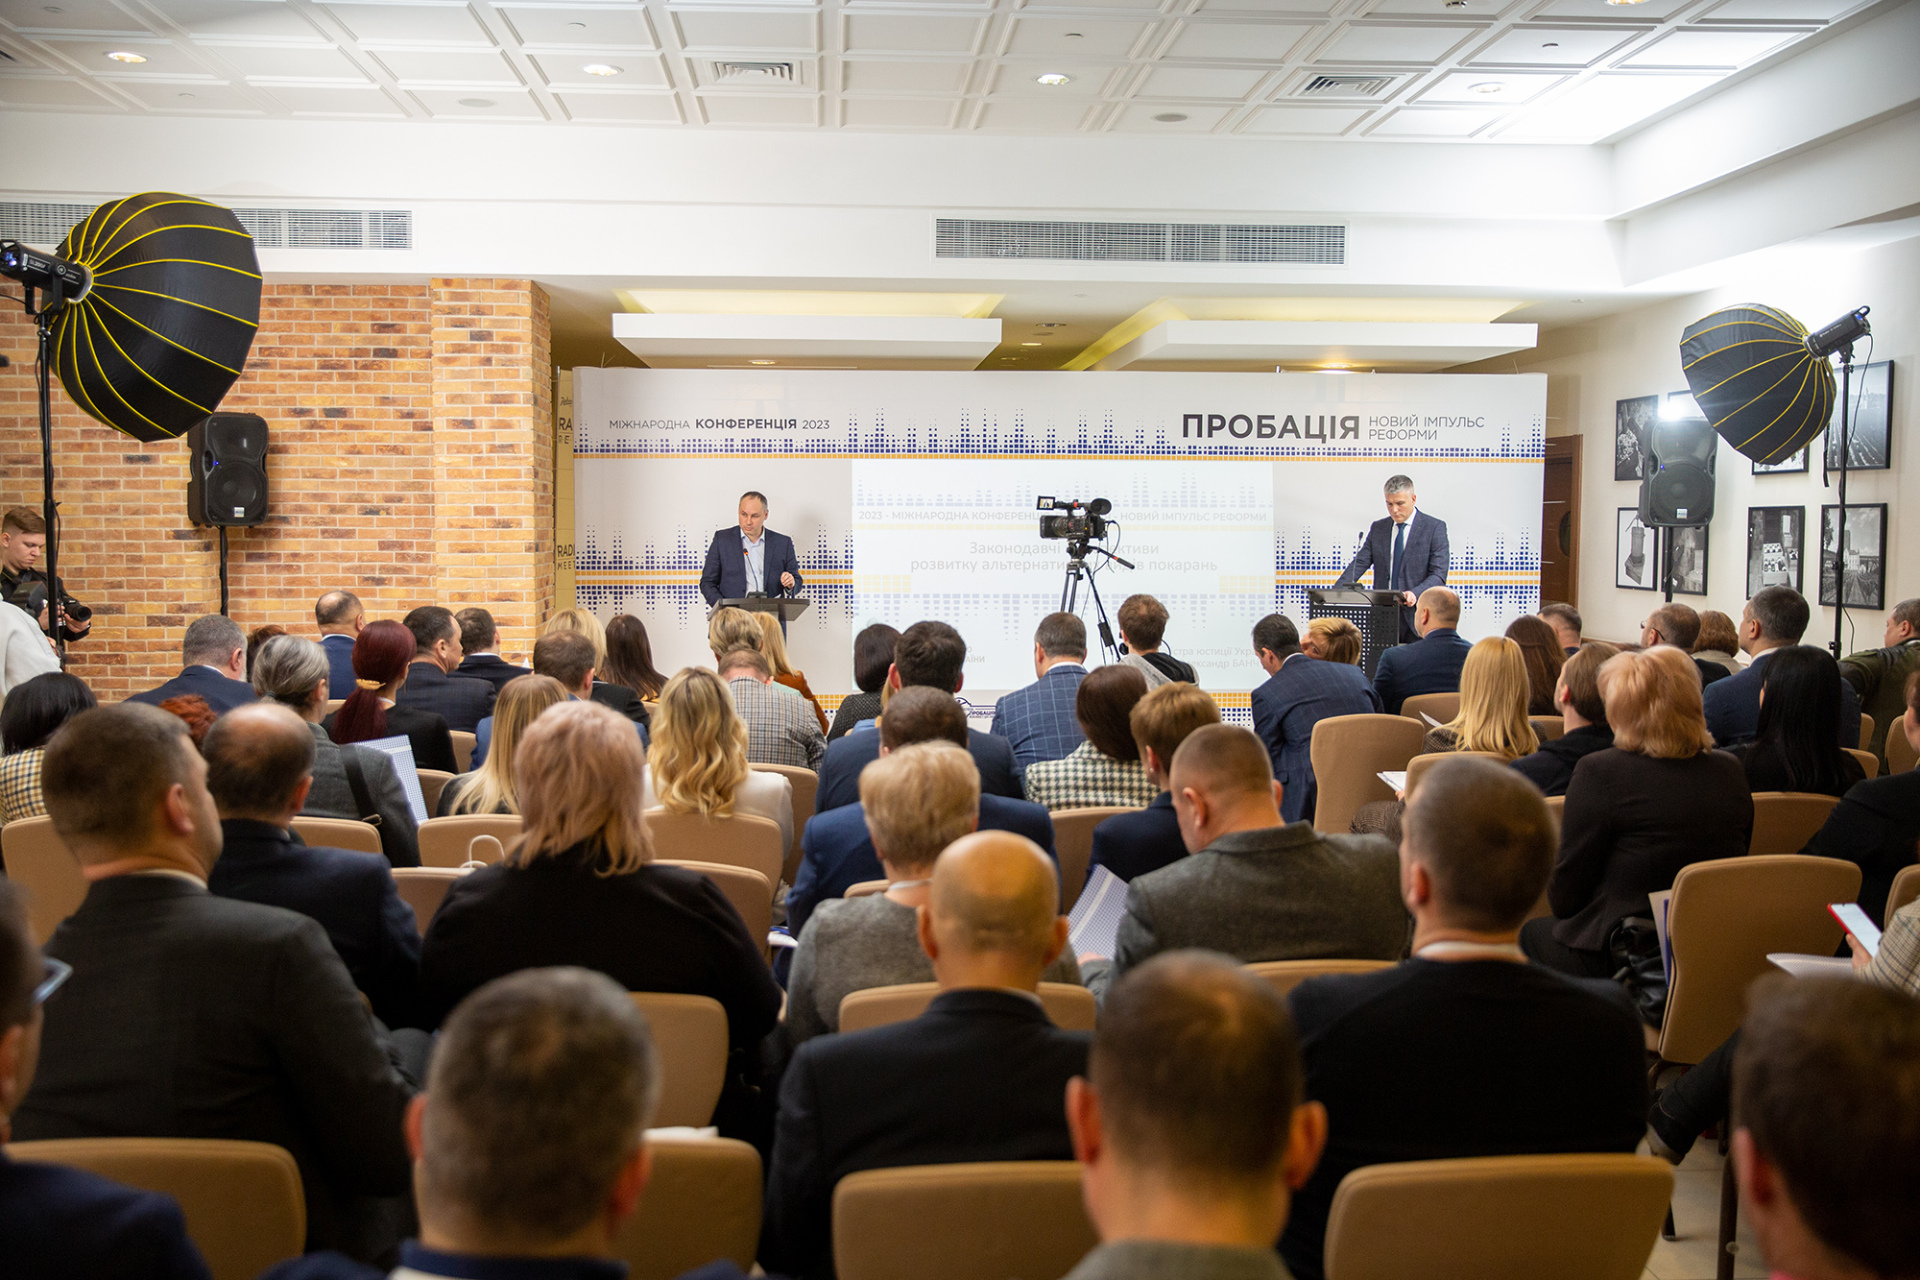 Probation – a New Impetus for Reform: EU Project Pravo-Justice co-organized an International Conference